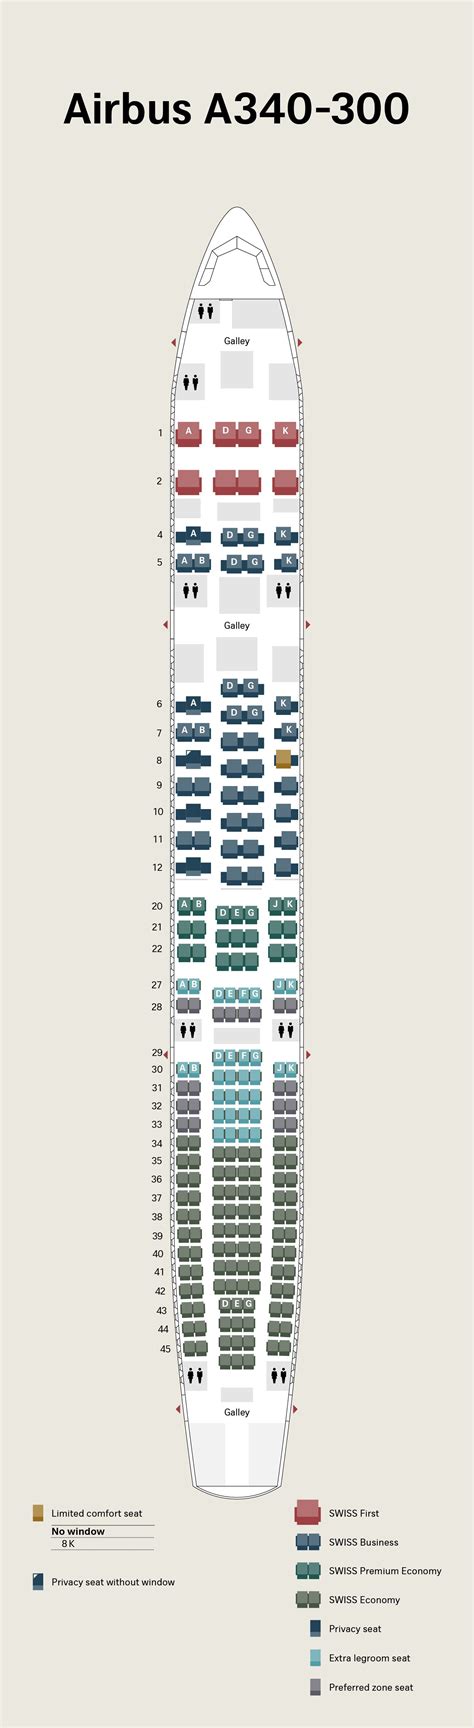 Lufthansa Seat Map Airbus A330 300 Two Birds Home